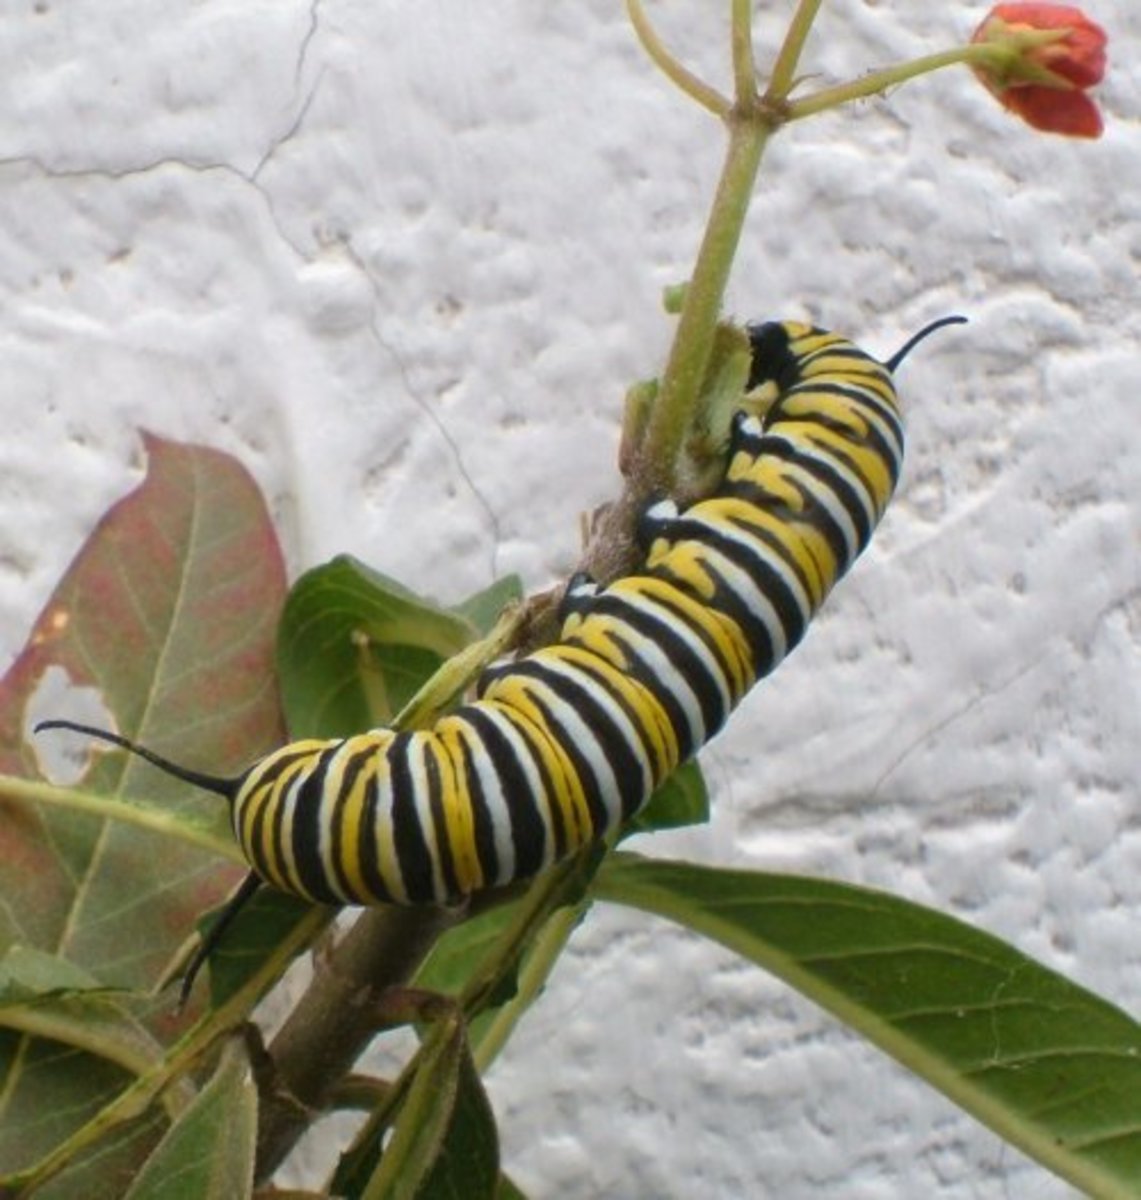 Dangers to the monarch butterfly and how to grow milkweed plants as food for monarch butterfly caterpillars